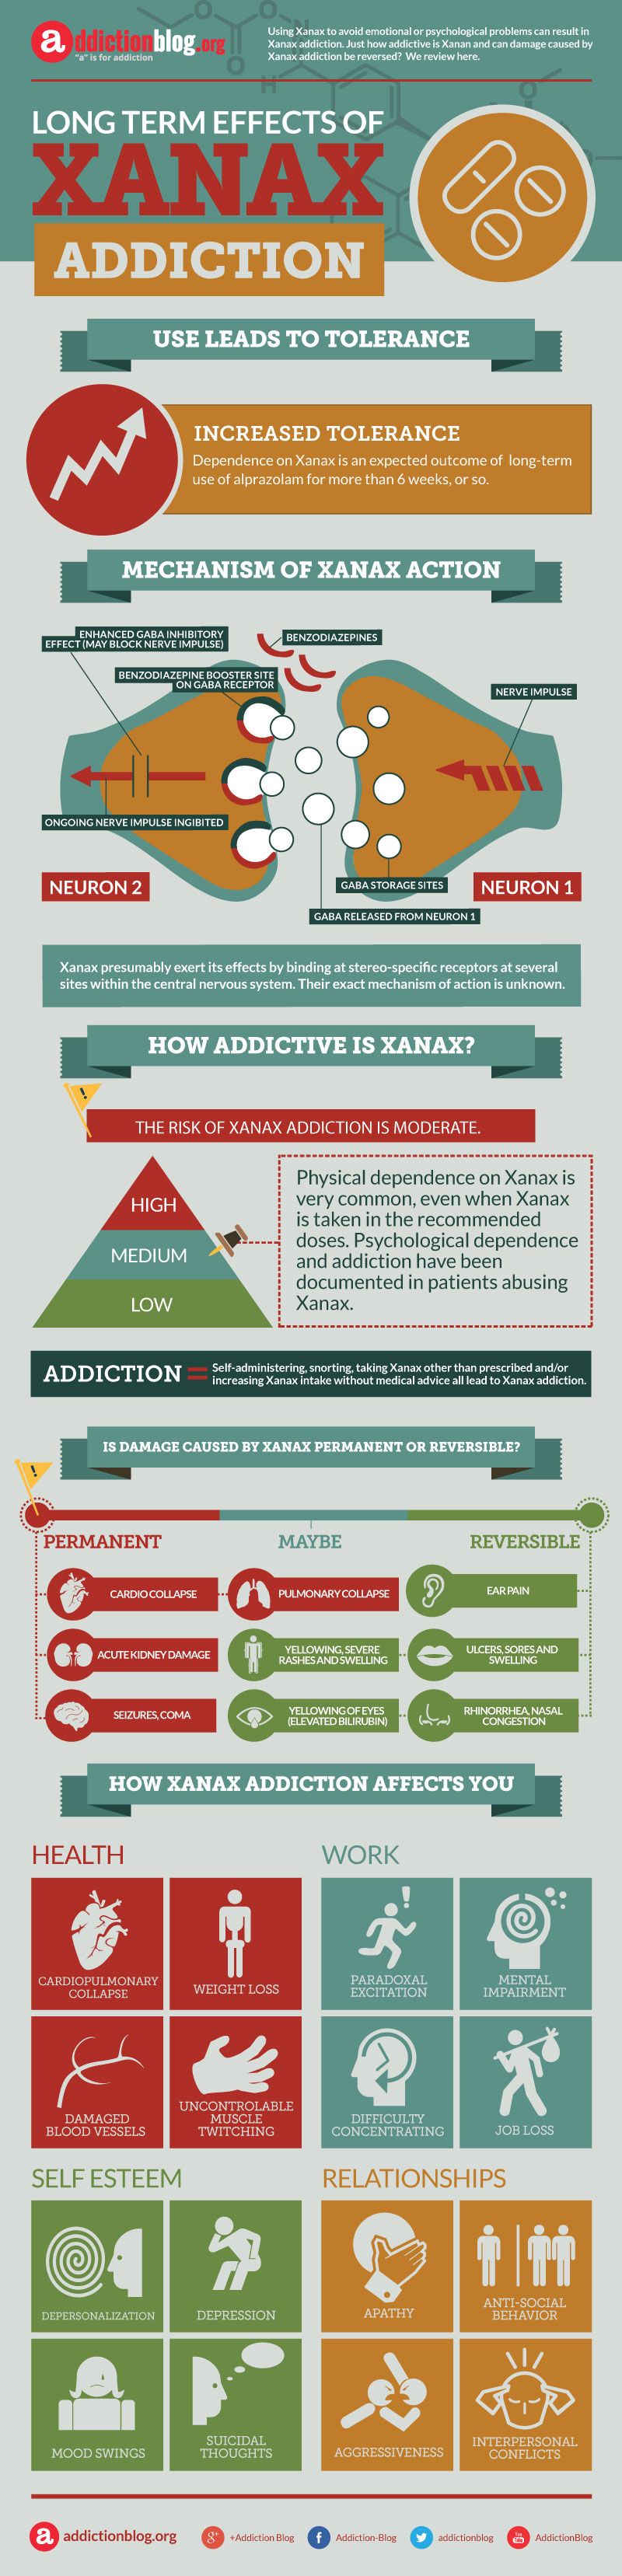 Long term effects of Xanax addiction (INFOGRAPHIC)